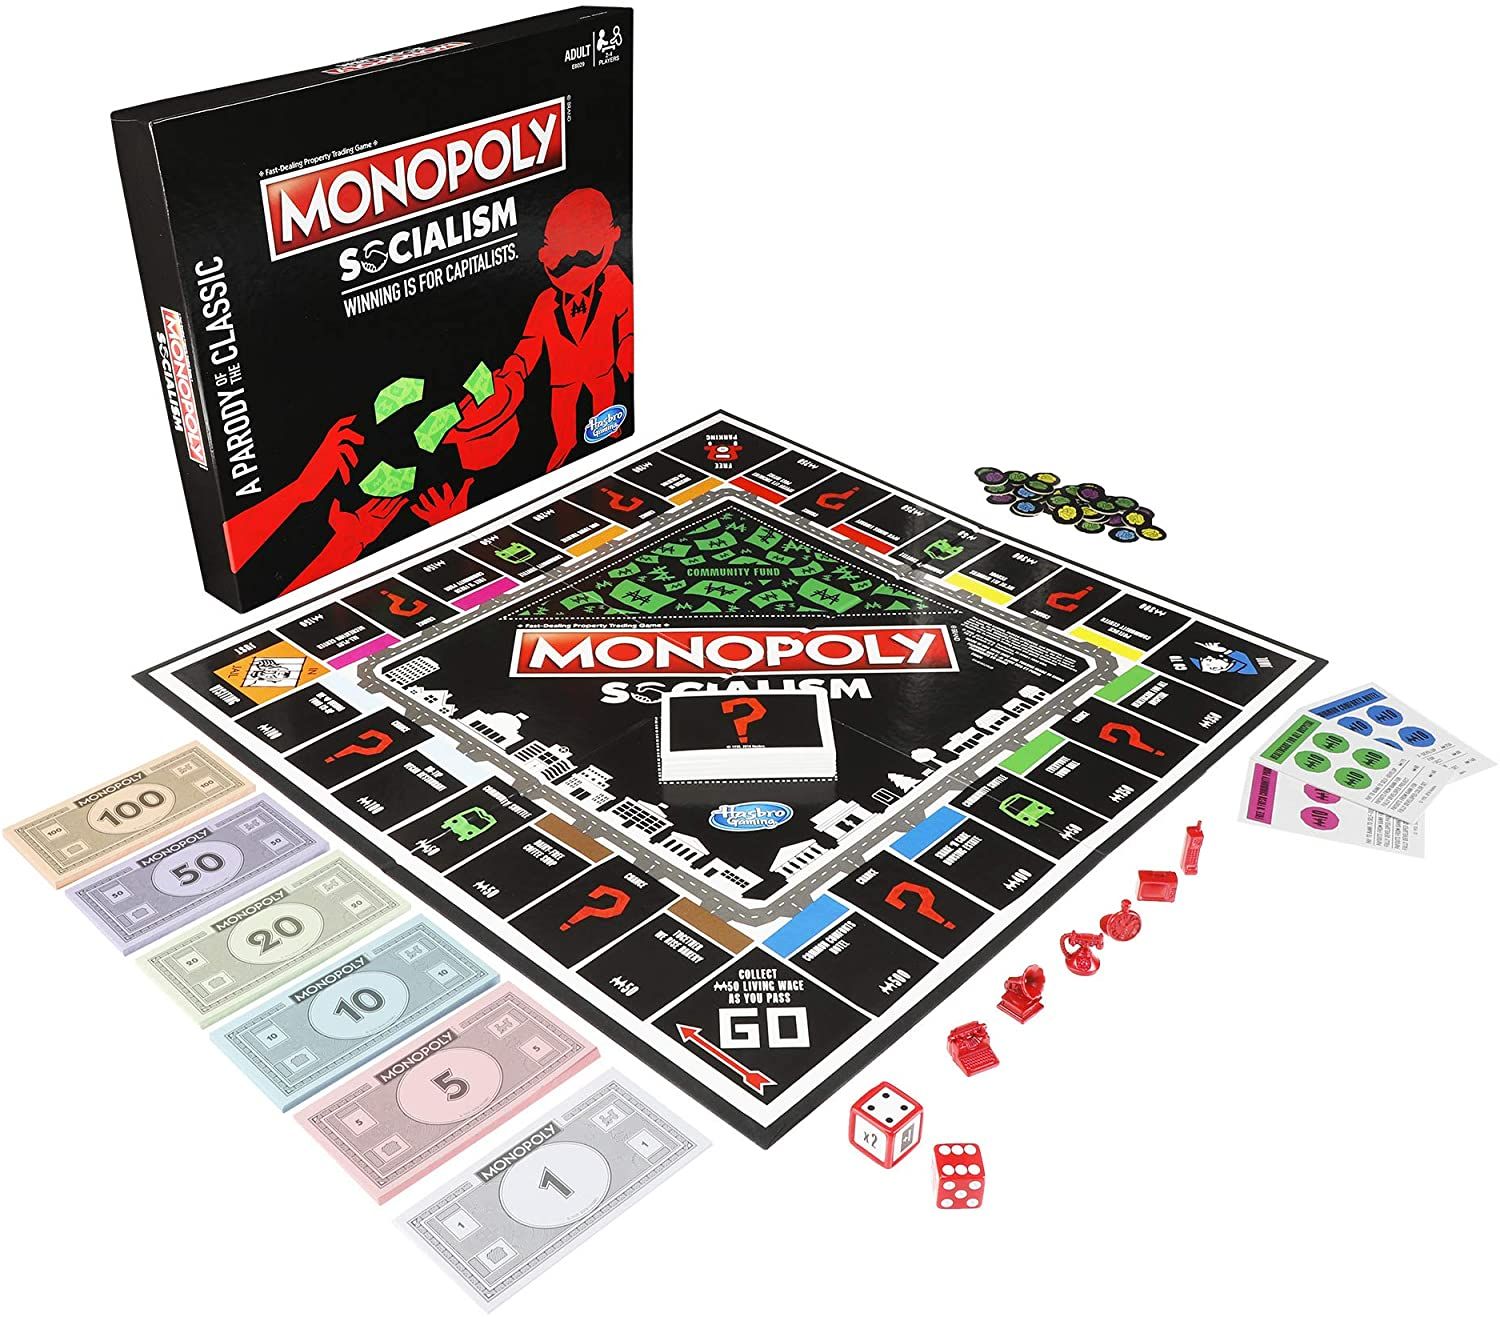 Monopoly Socialism Board Game 2